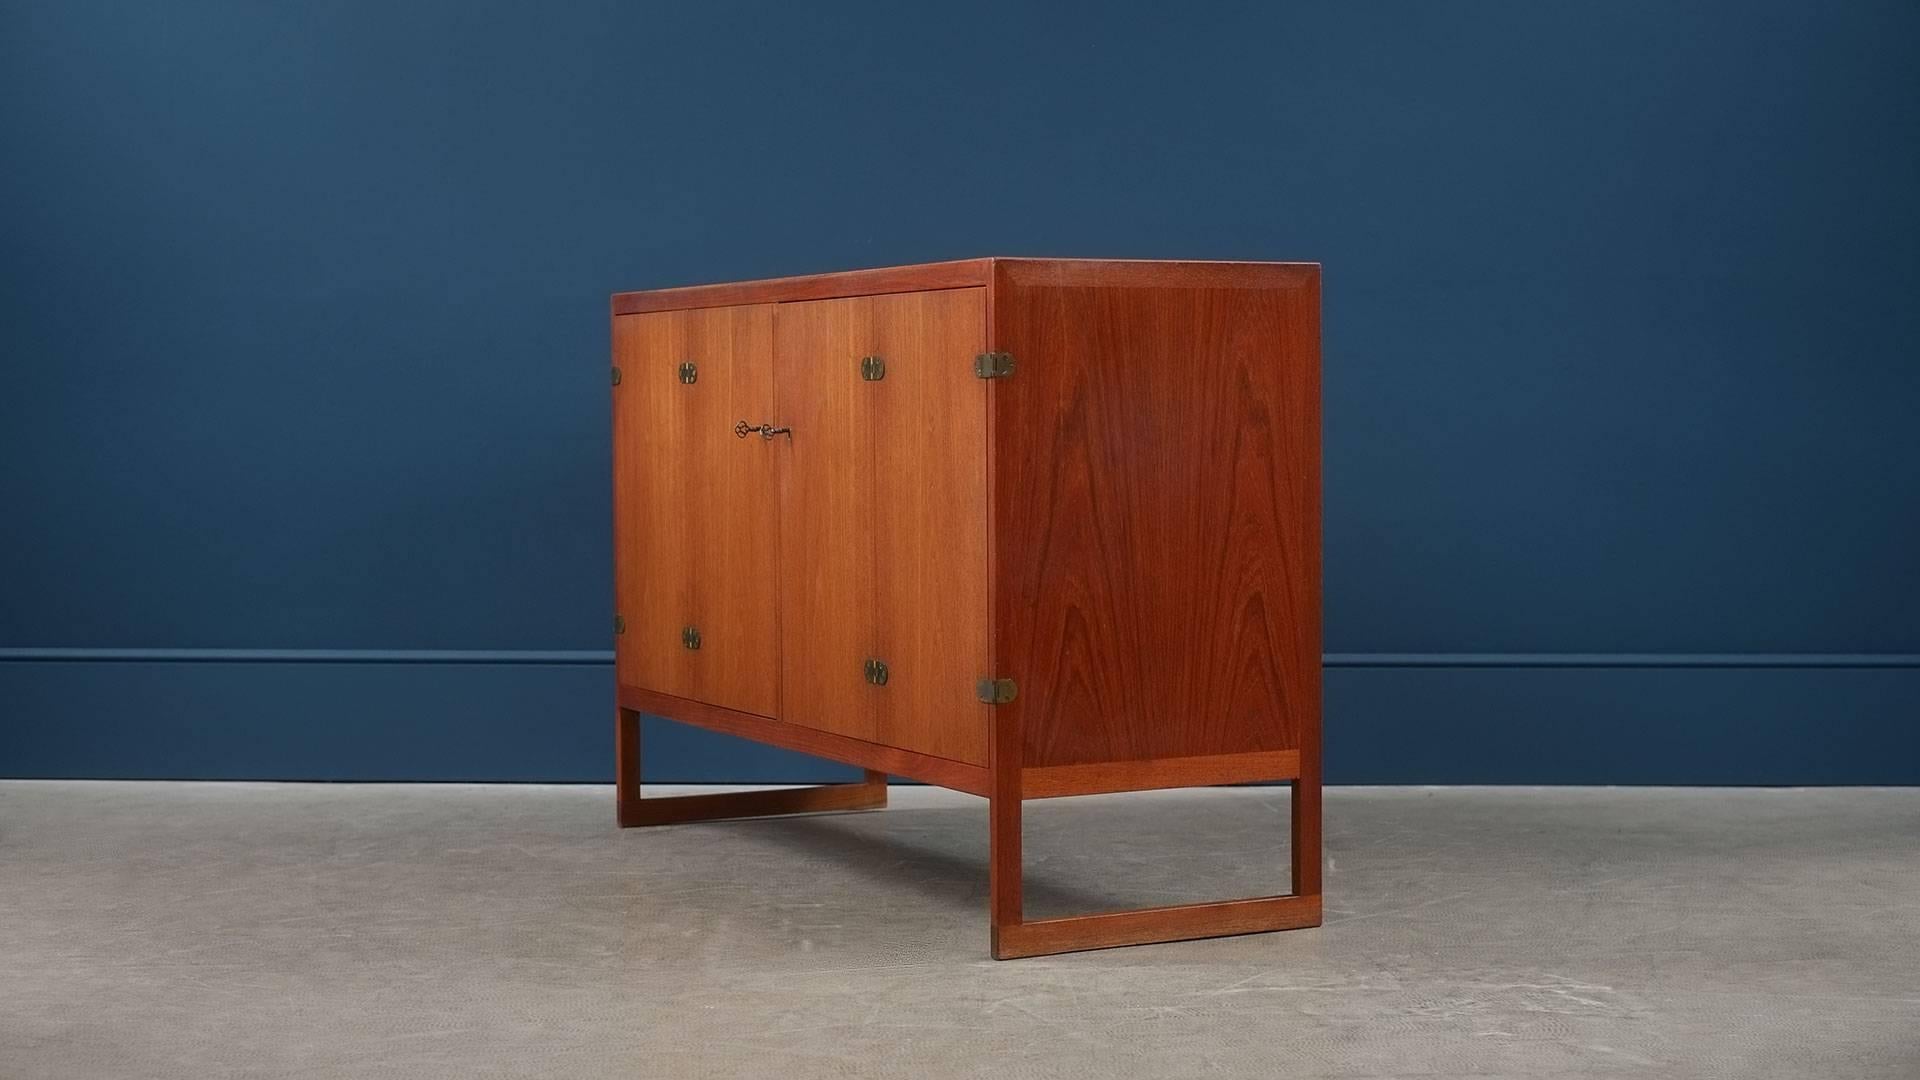 Rare and beautiful cabinet/sideboard in teak with brass details designed by Børge Mogensen for P. Lauritsen & Søn, 1957, Denmark. This example with contrasting oak interior. Wonderful piece, superb quality and ultra elegant.